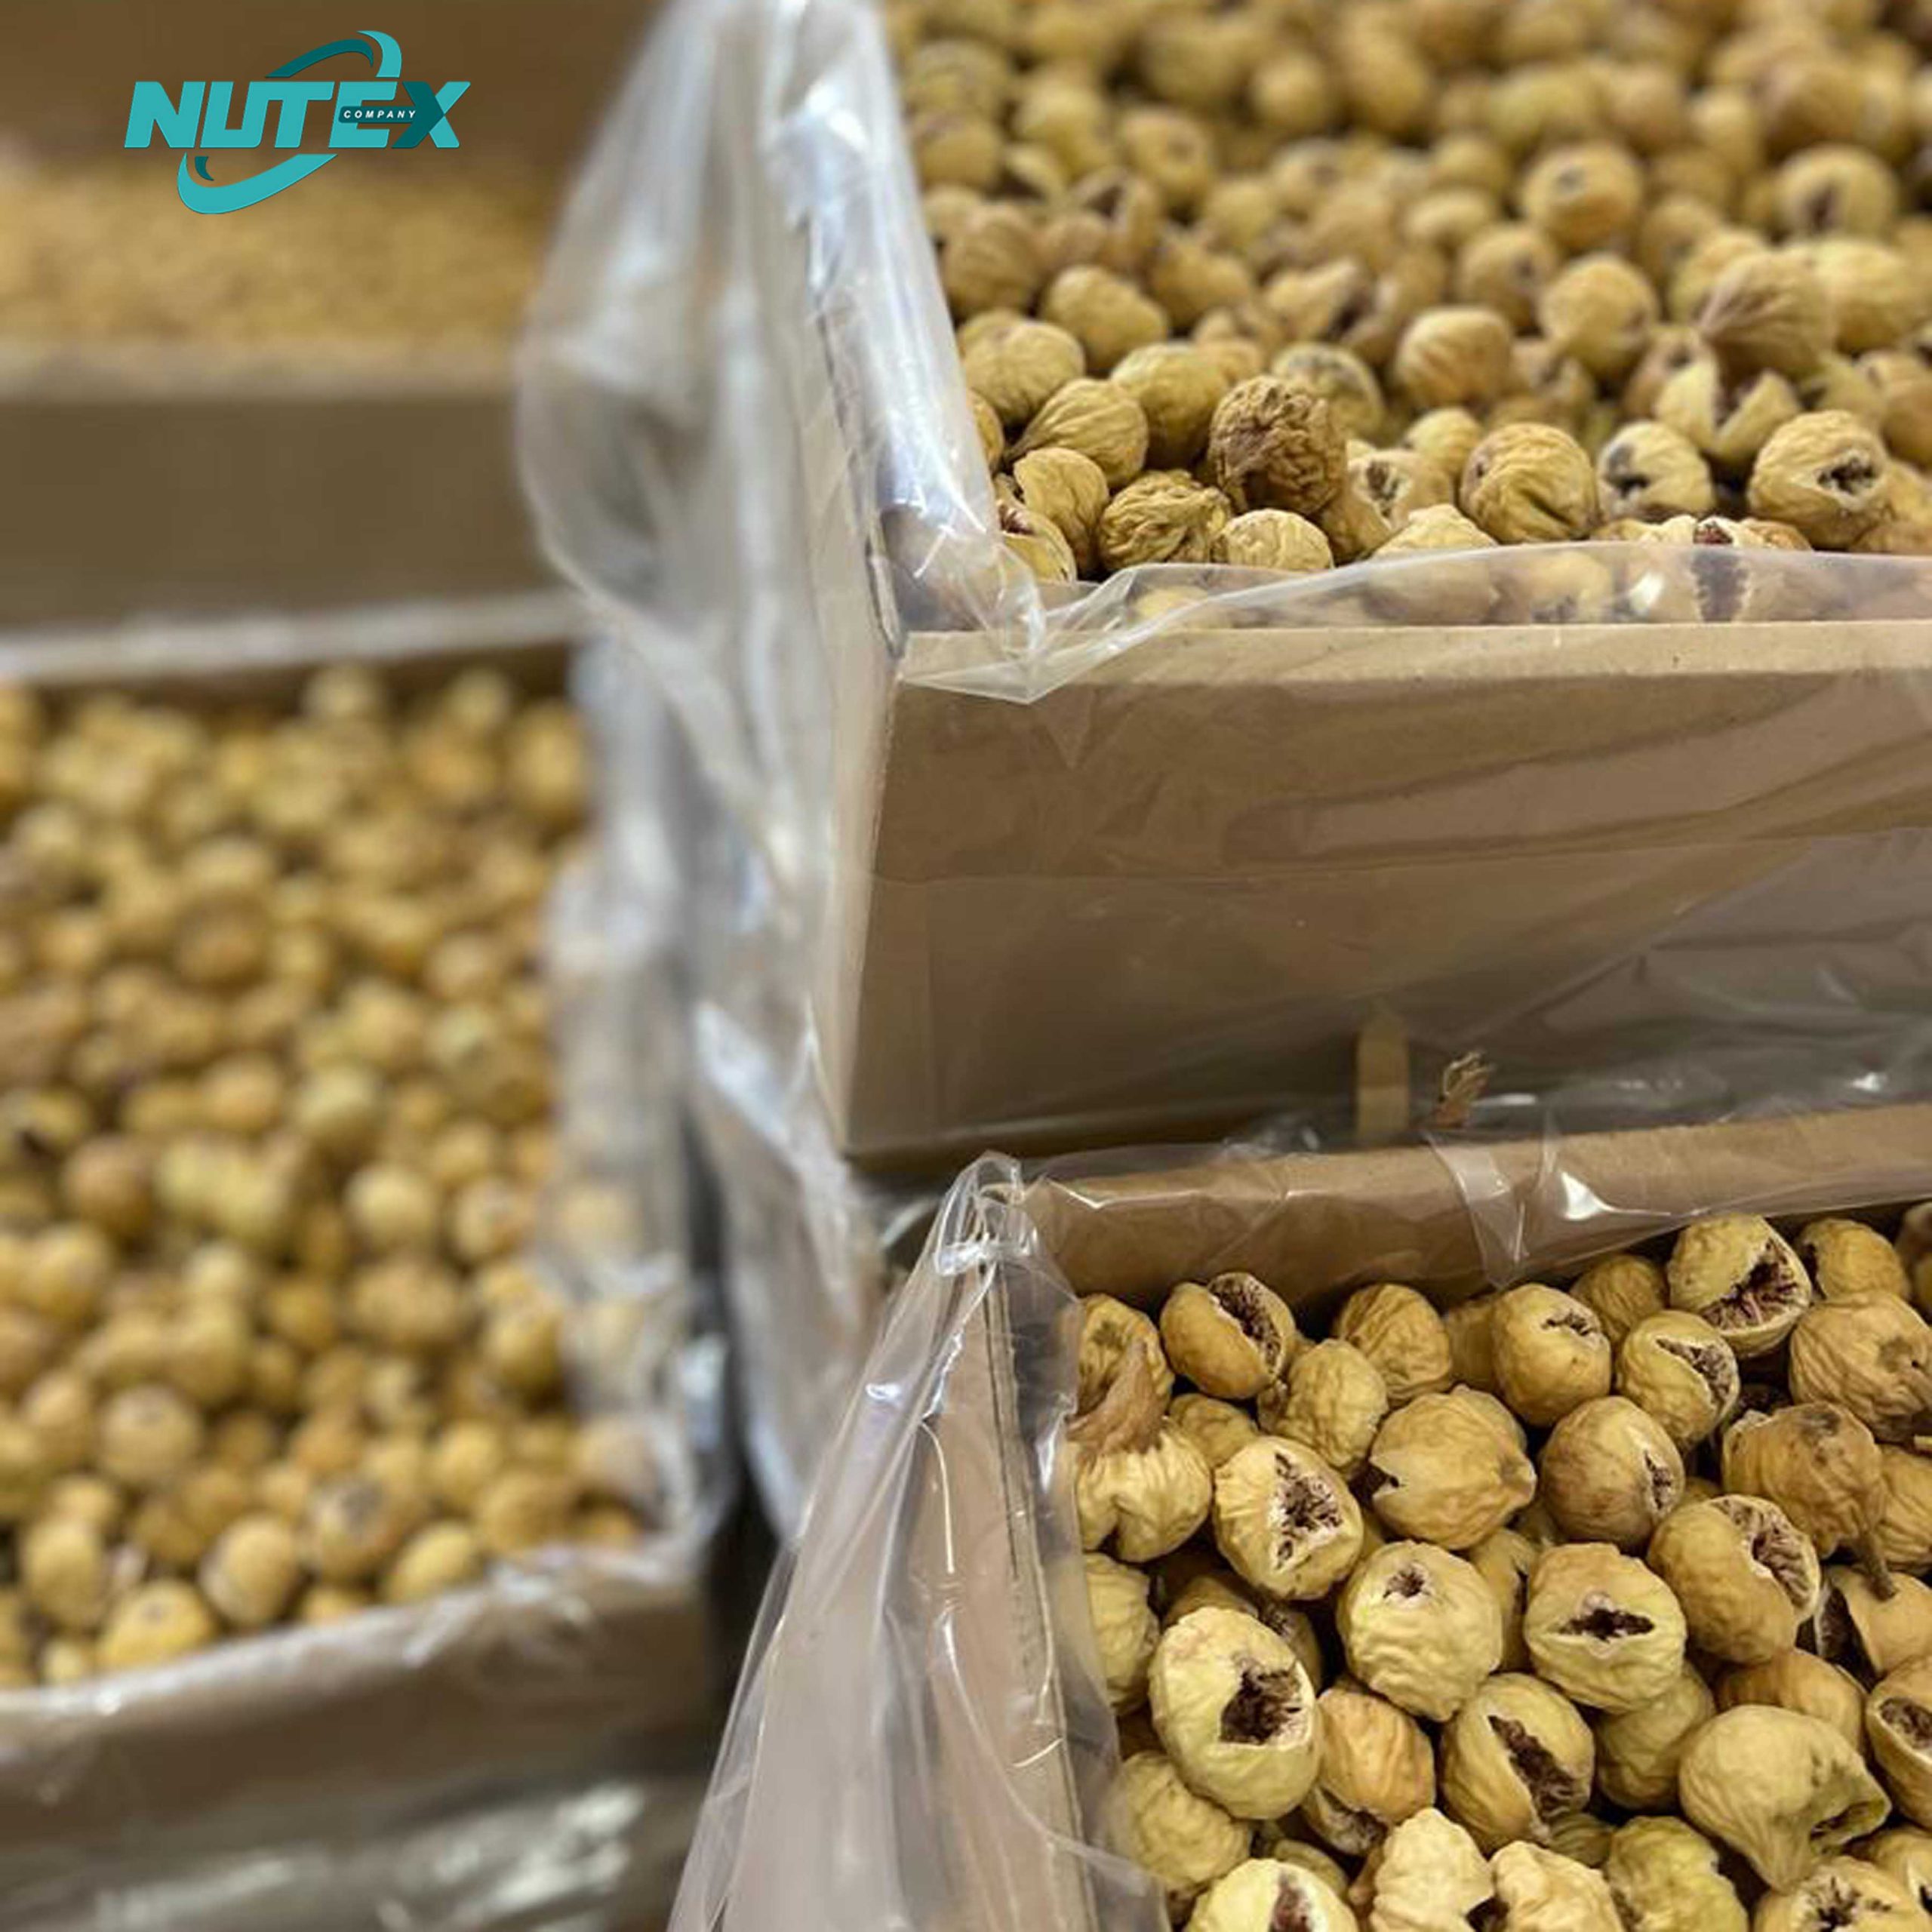 Buy Organic Persian Dried Figs - Nutex Dried Fruits